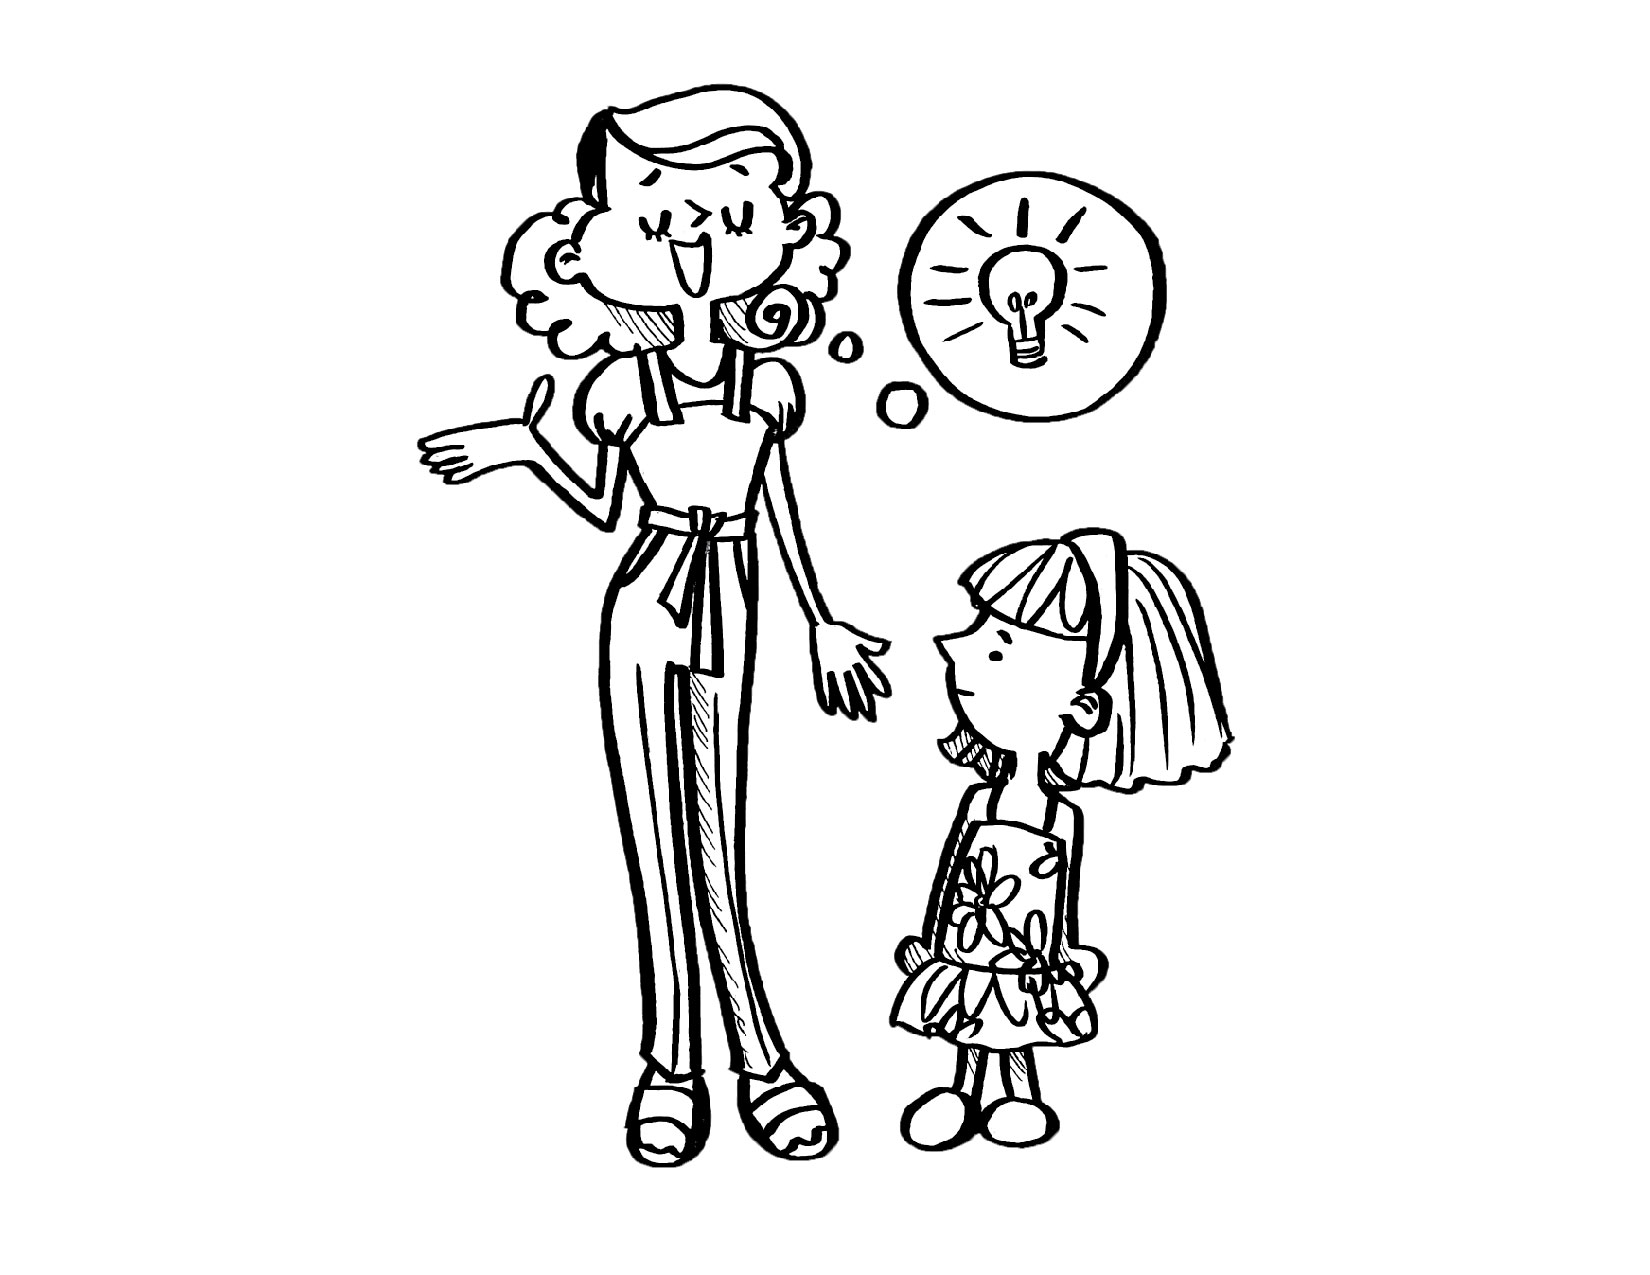 Illustration of a mother speaking to her daughter with a light bulb thought bubble between them